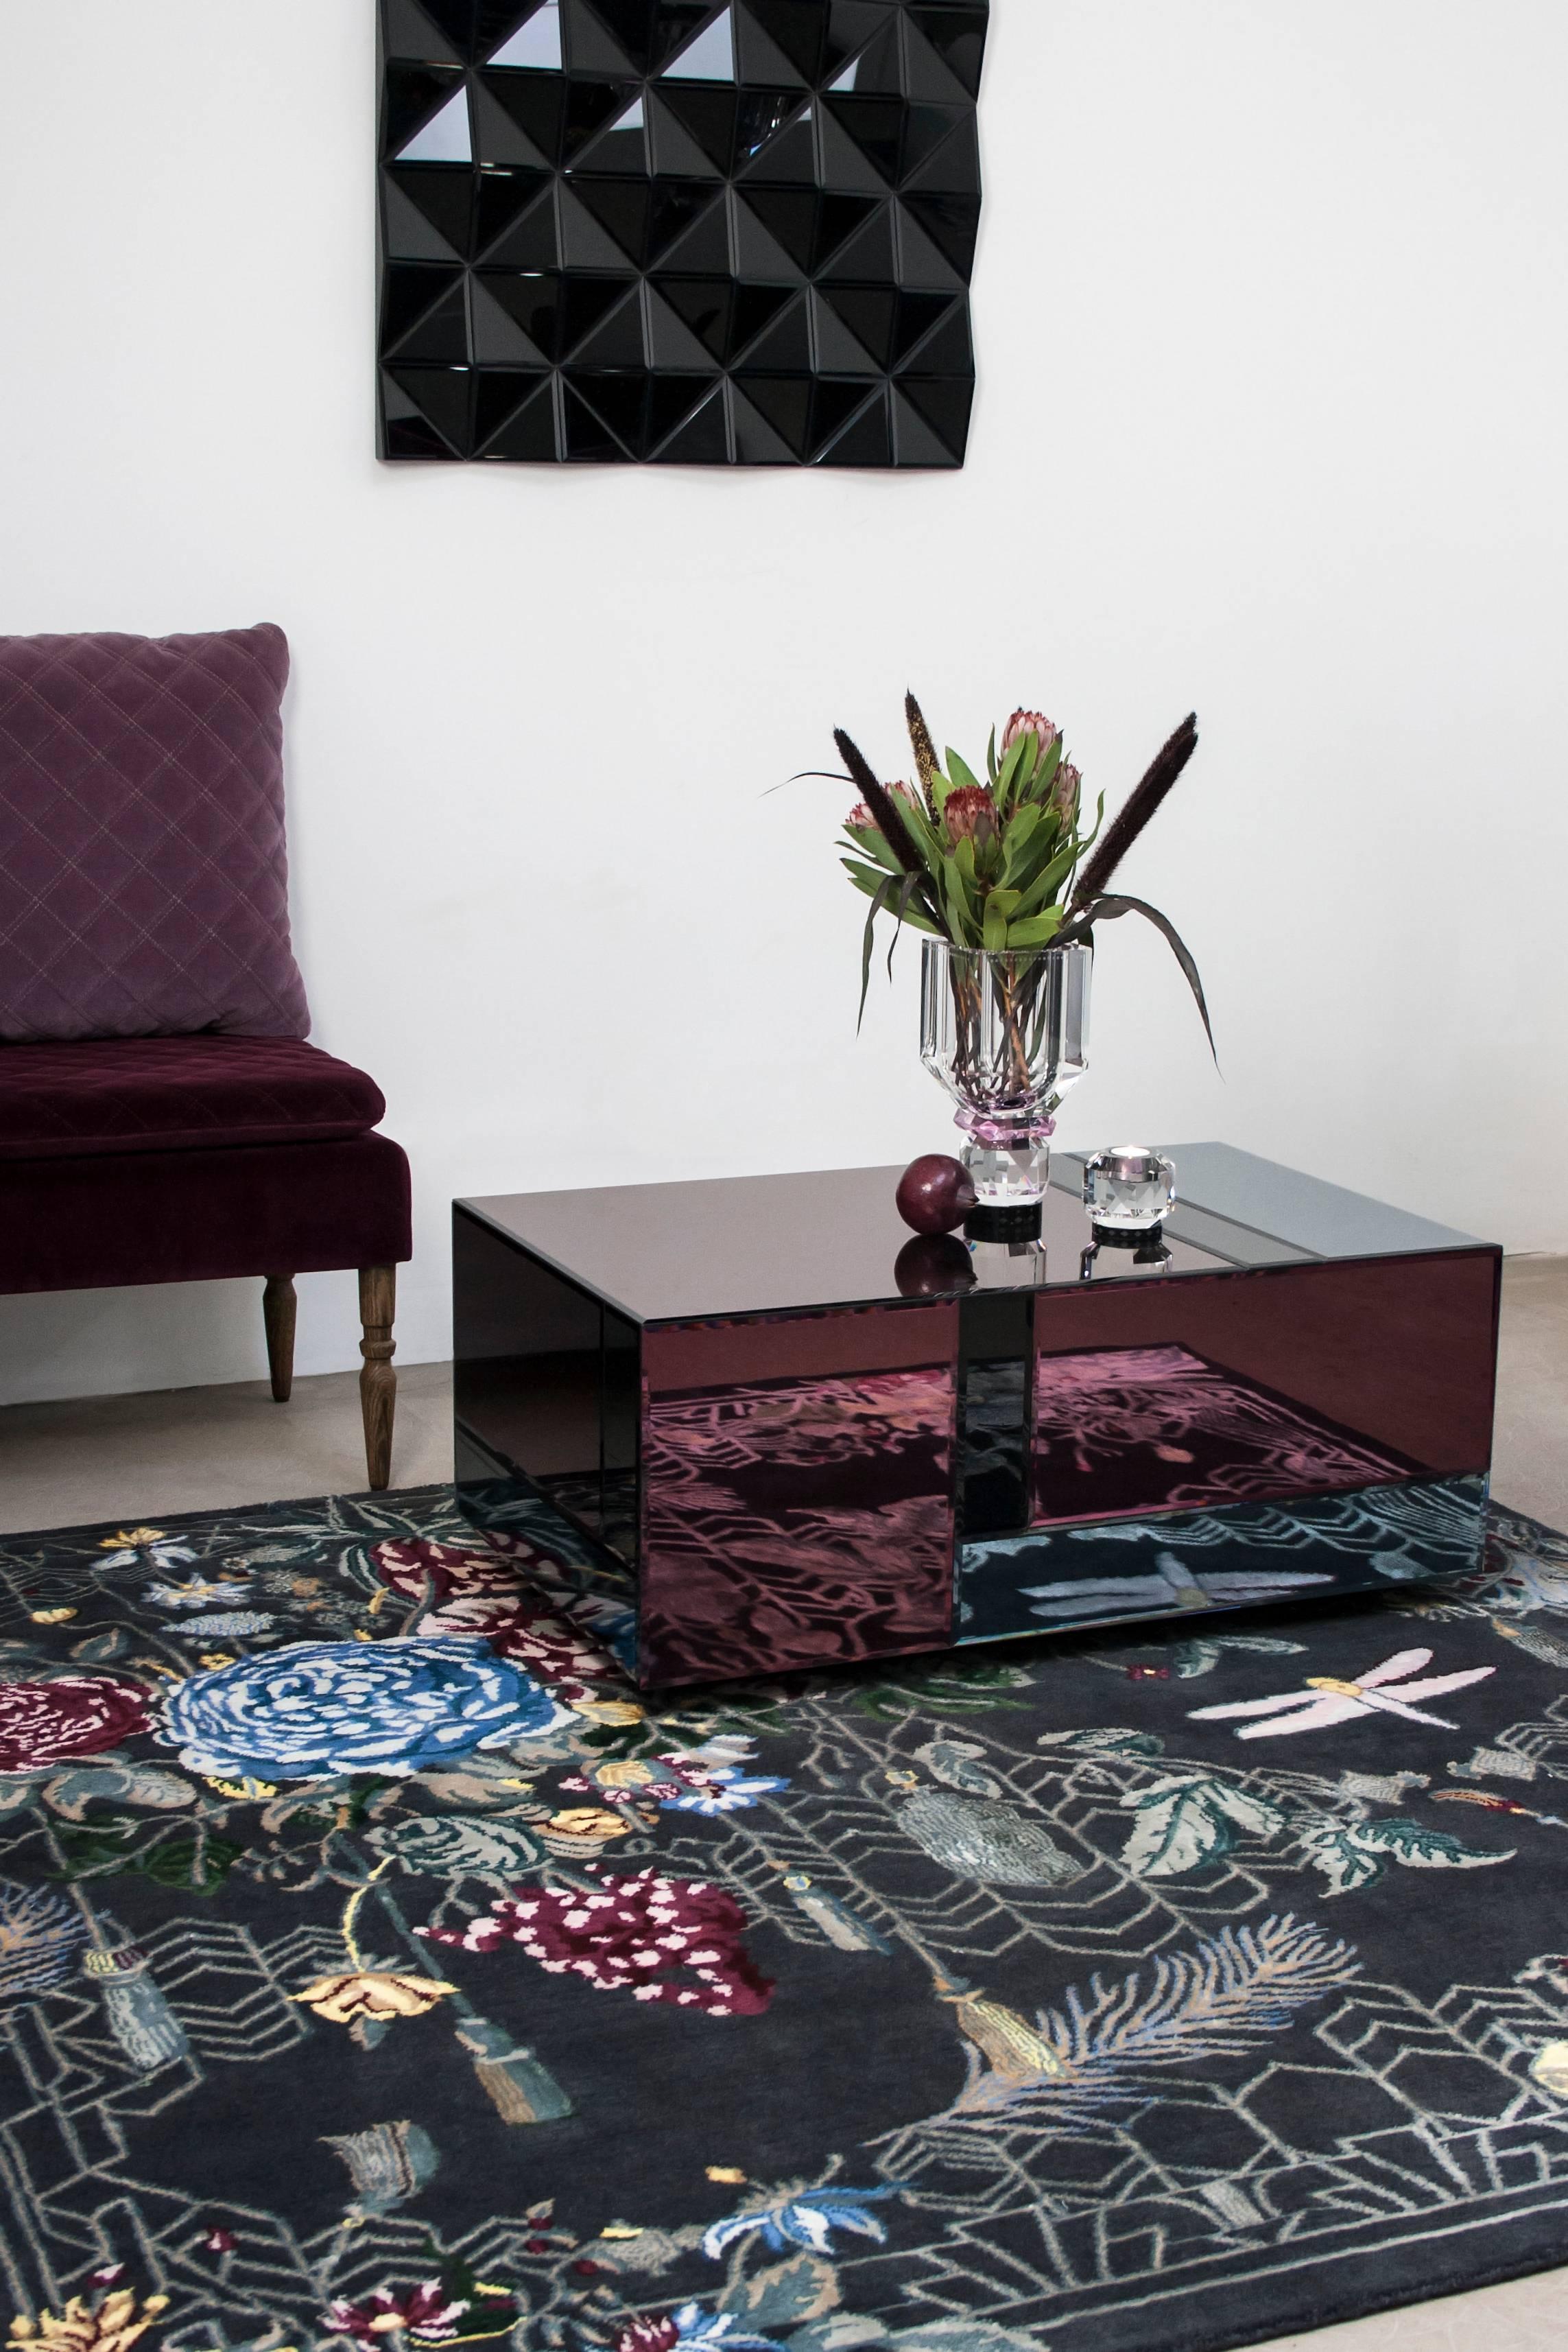 Escape flowers
Hand knotted rug
Hand knotted with 140.000 knots per sqm.
50% silk - 50% New Zealand wool
Measures: L 180 x H 180 cm

Enjoy the luxury of this fine hand knotted rug from Reflections Copenhagen. Truly a handmade work of art. The